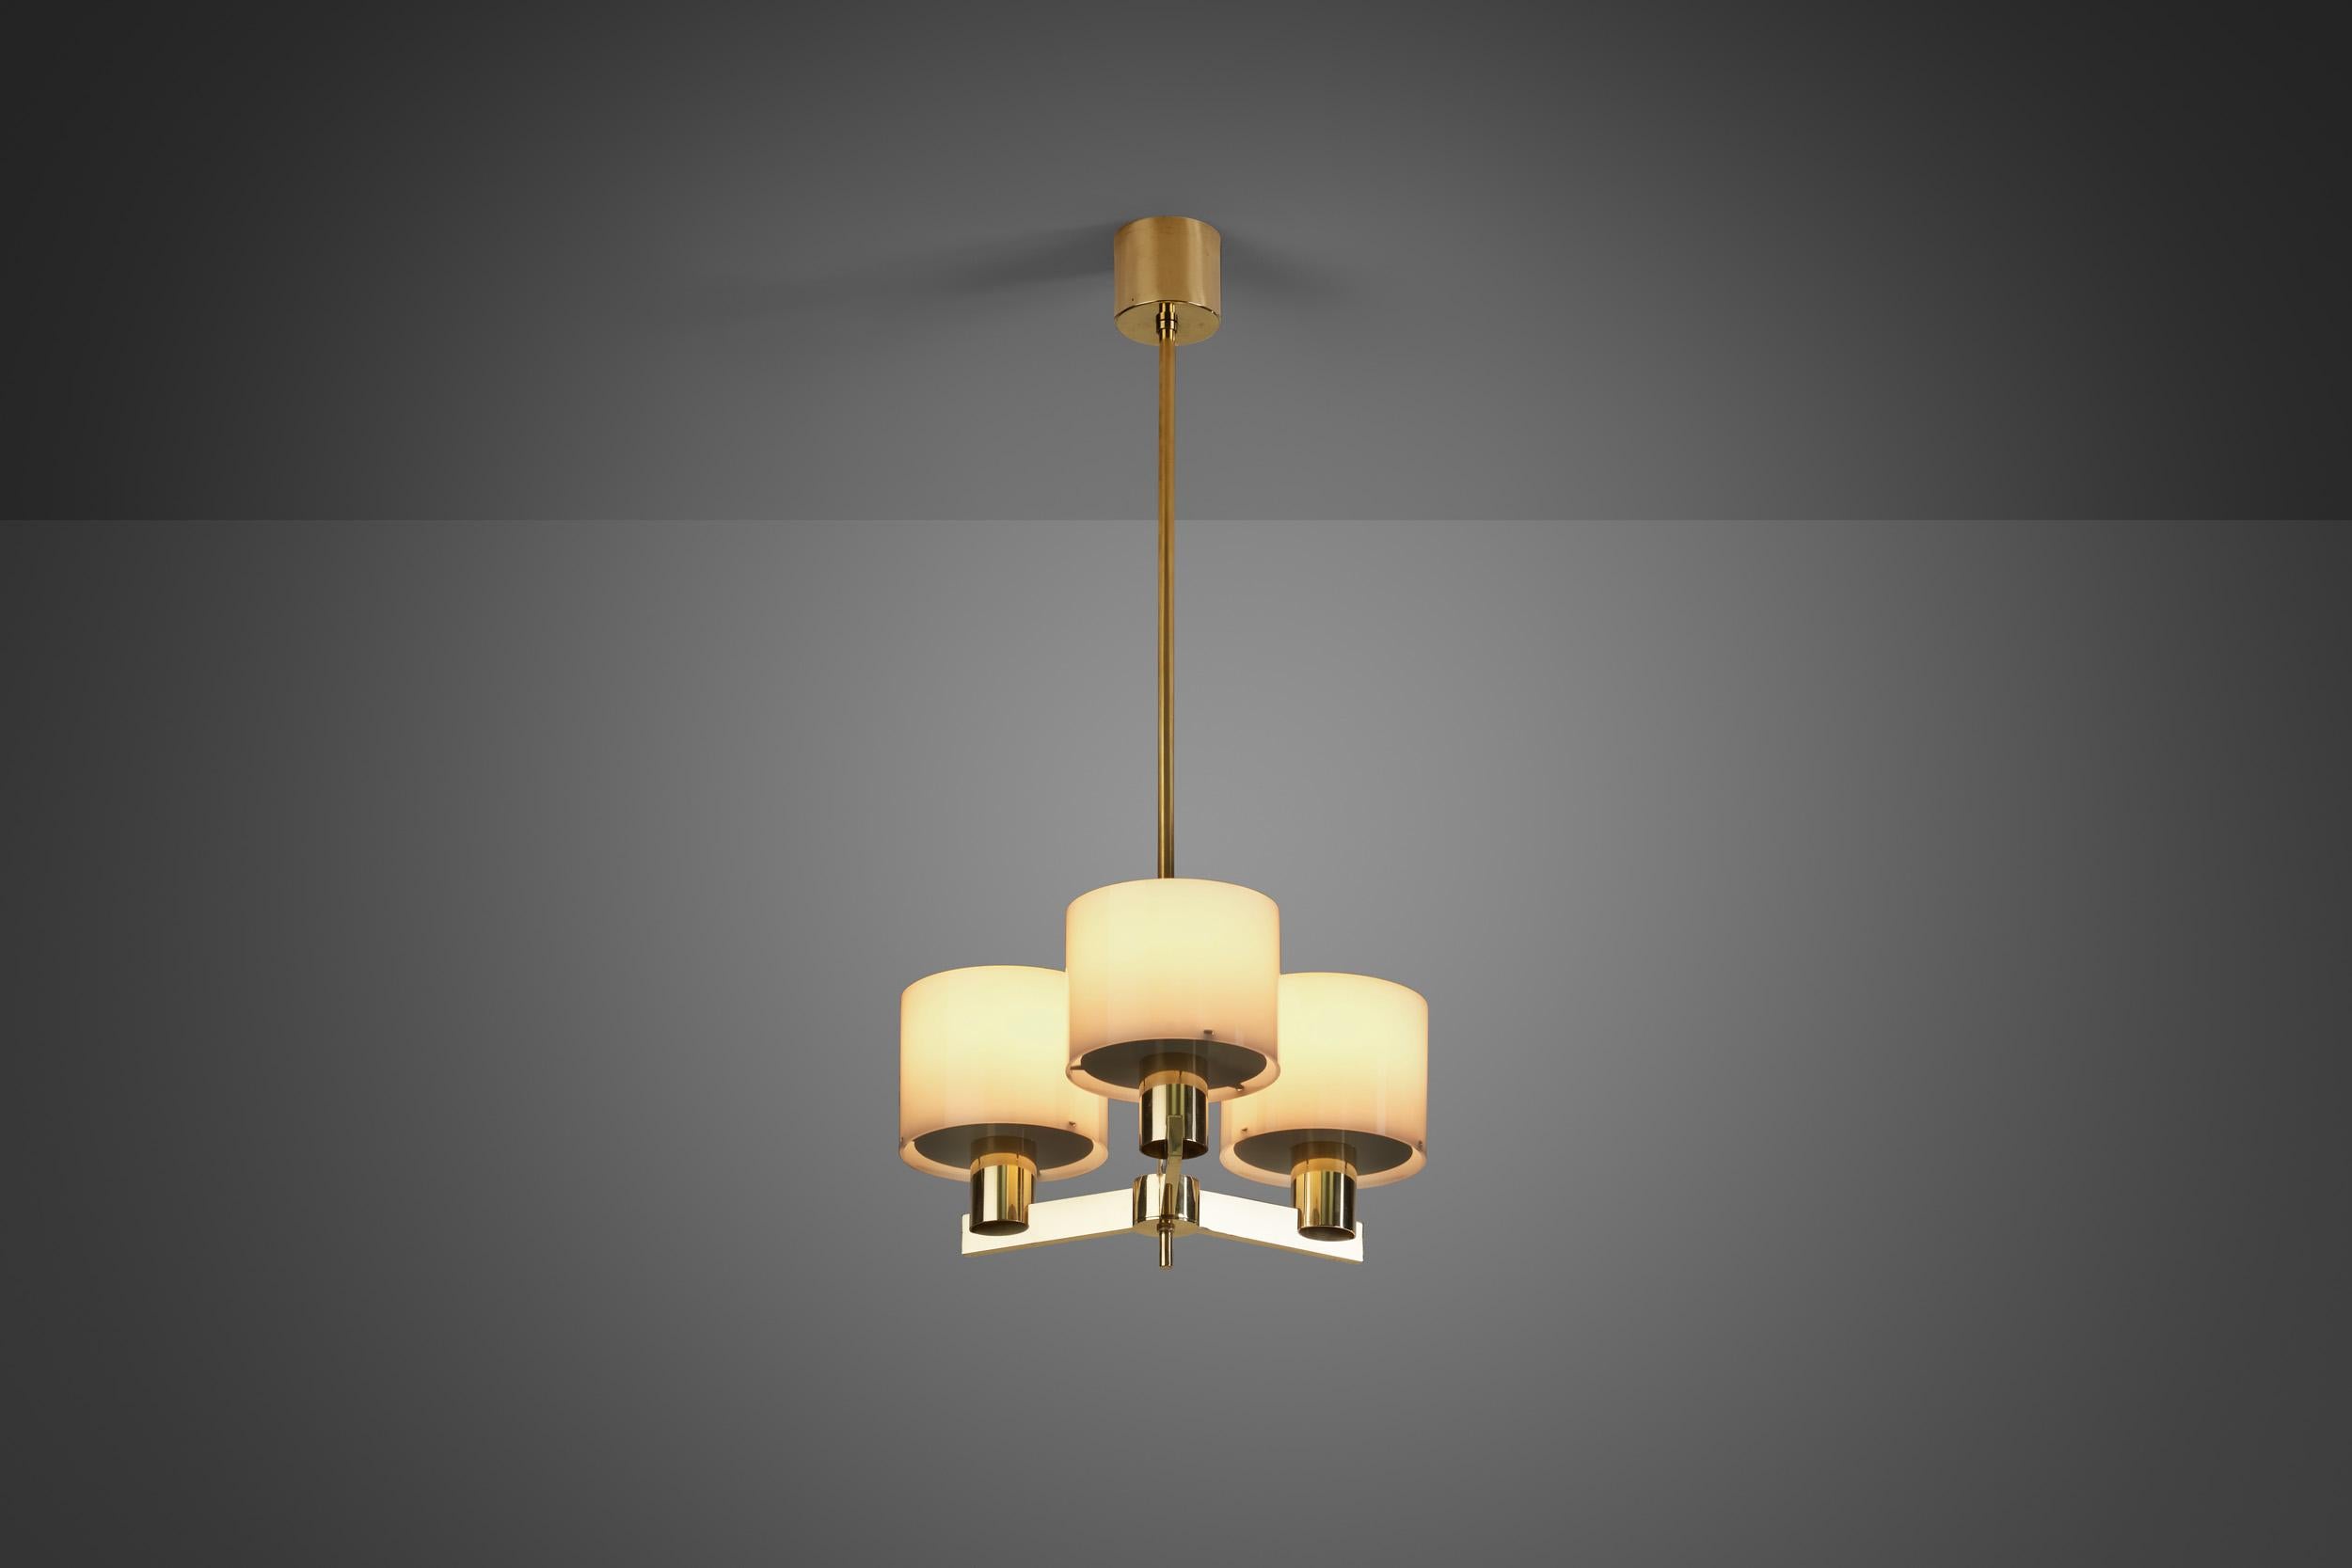 This geometric chandelier was created in what we now call “the golden age of Scandinavian design”. Hans-Agne Jakobsson was the great Swedish master of lighting, designing some of the most recognizable mid-century modern lamps of